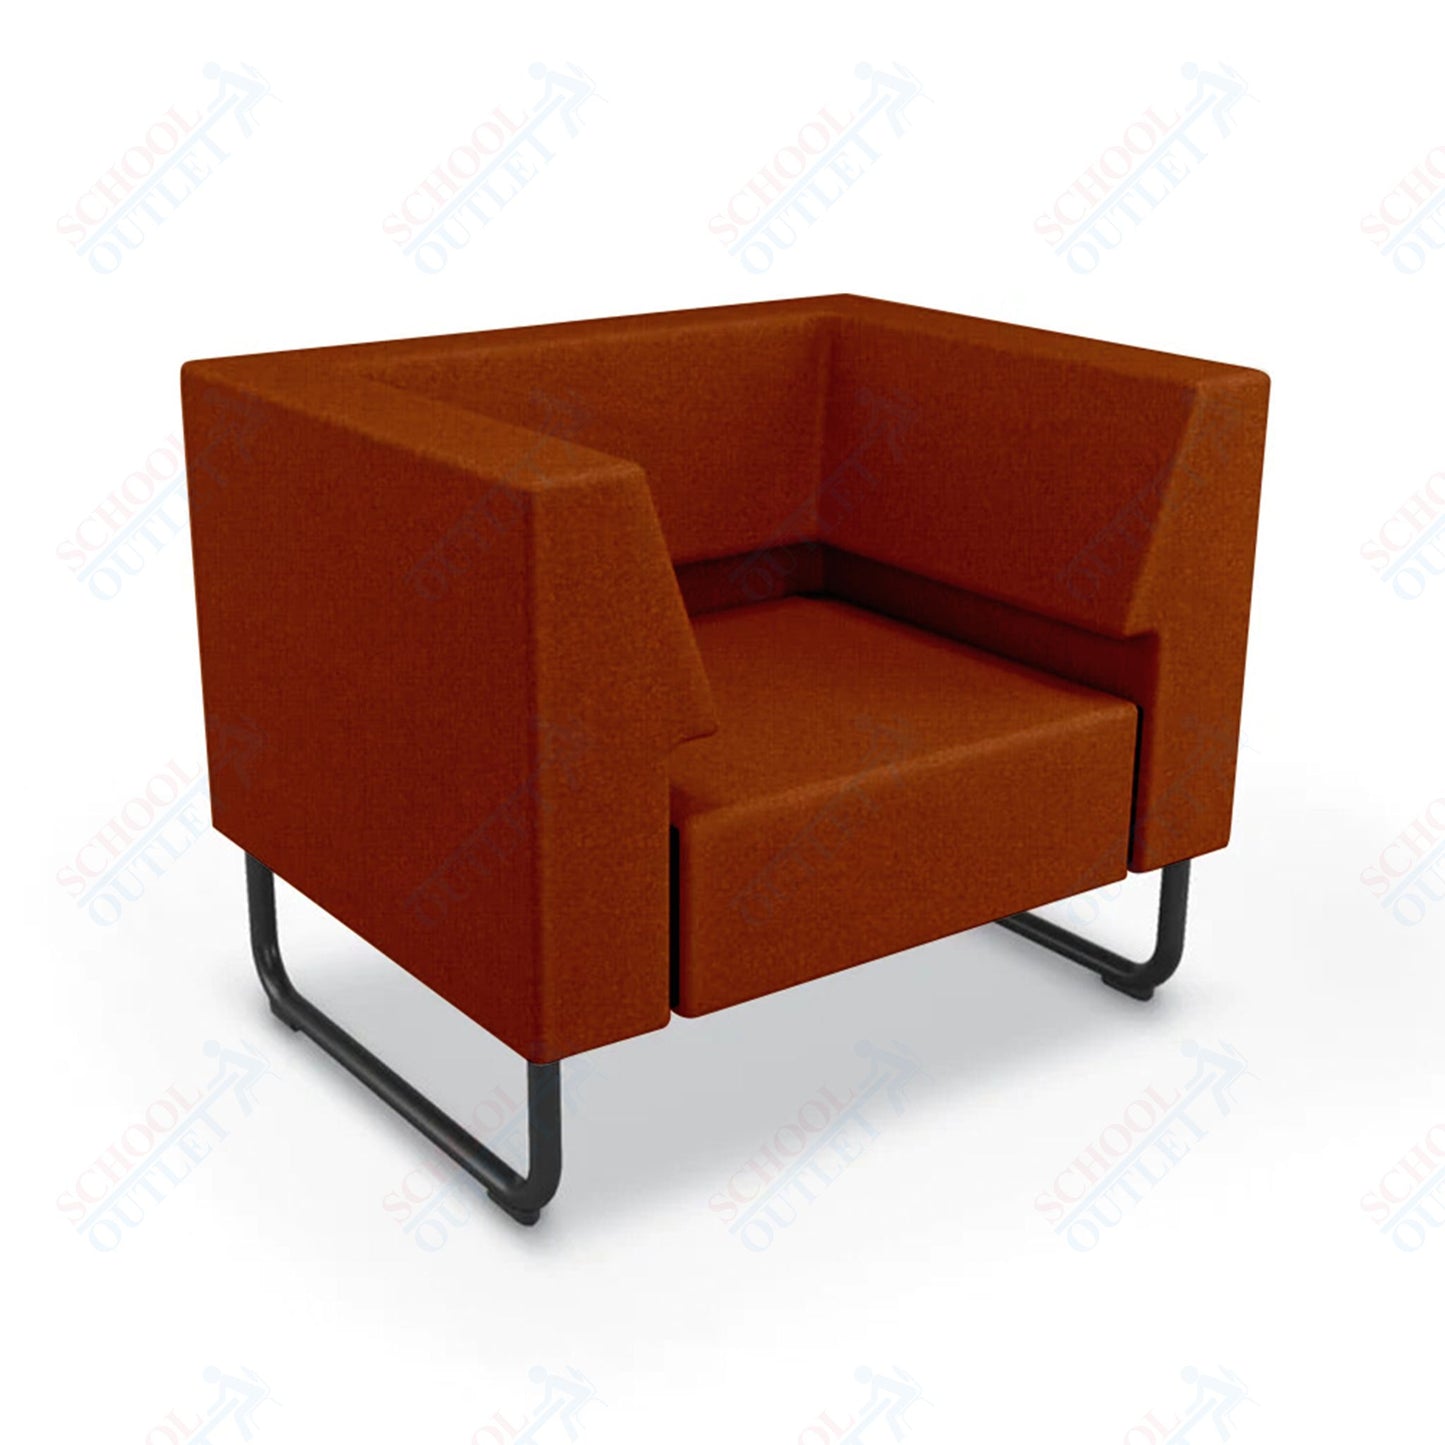 Mooreco Akt Soft Seating Lounge Chair - Both Arms - Grade 02 Fabric and Powder Coated Sled Legs